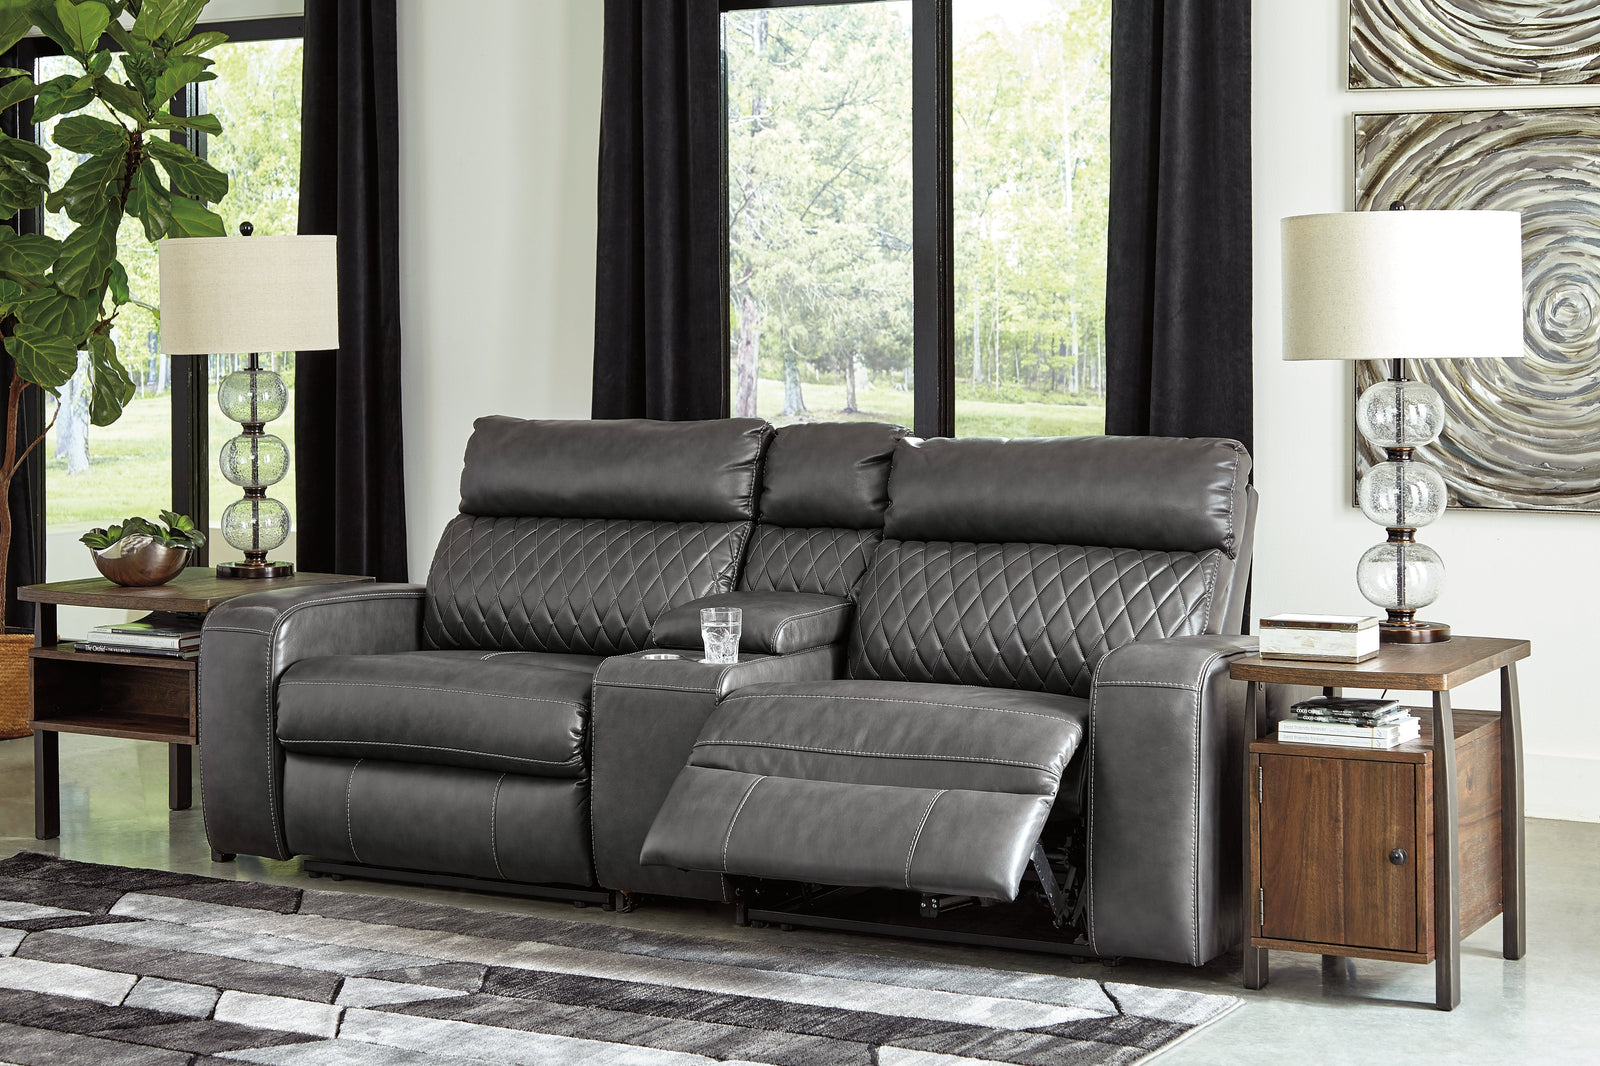 Samperstone Gray Faux Leather 3-Piece Power Reclining Sectional